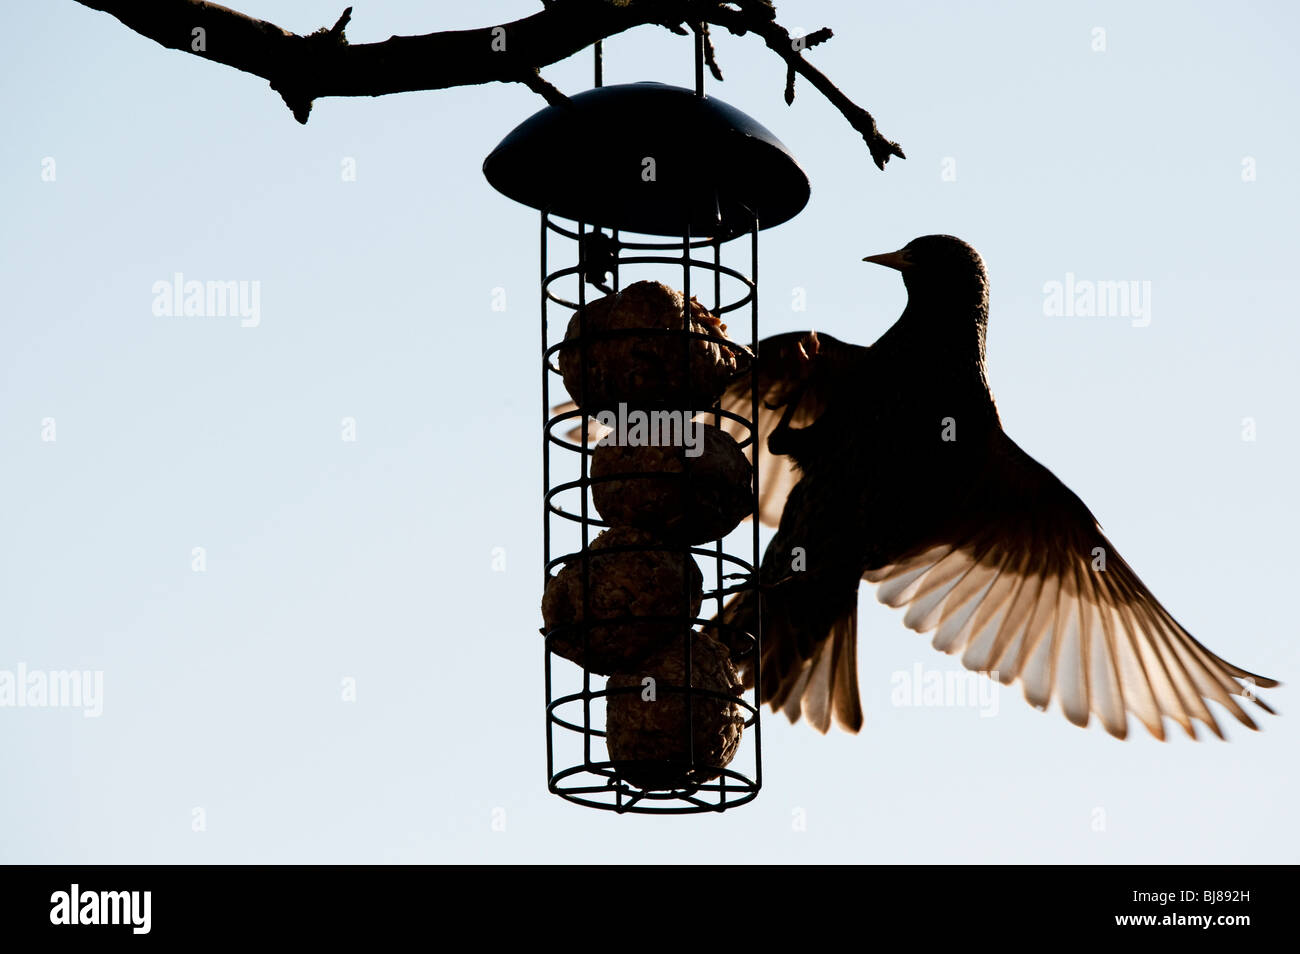 Sturnus vulgaris. Silhouette of Starling on a fat ball feeder hanging from a tree in a garden. UK Stock Photo